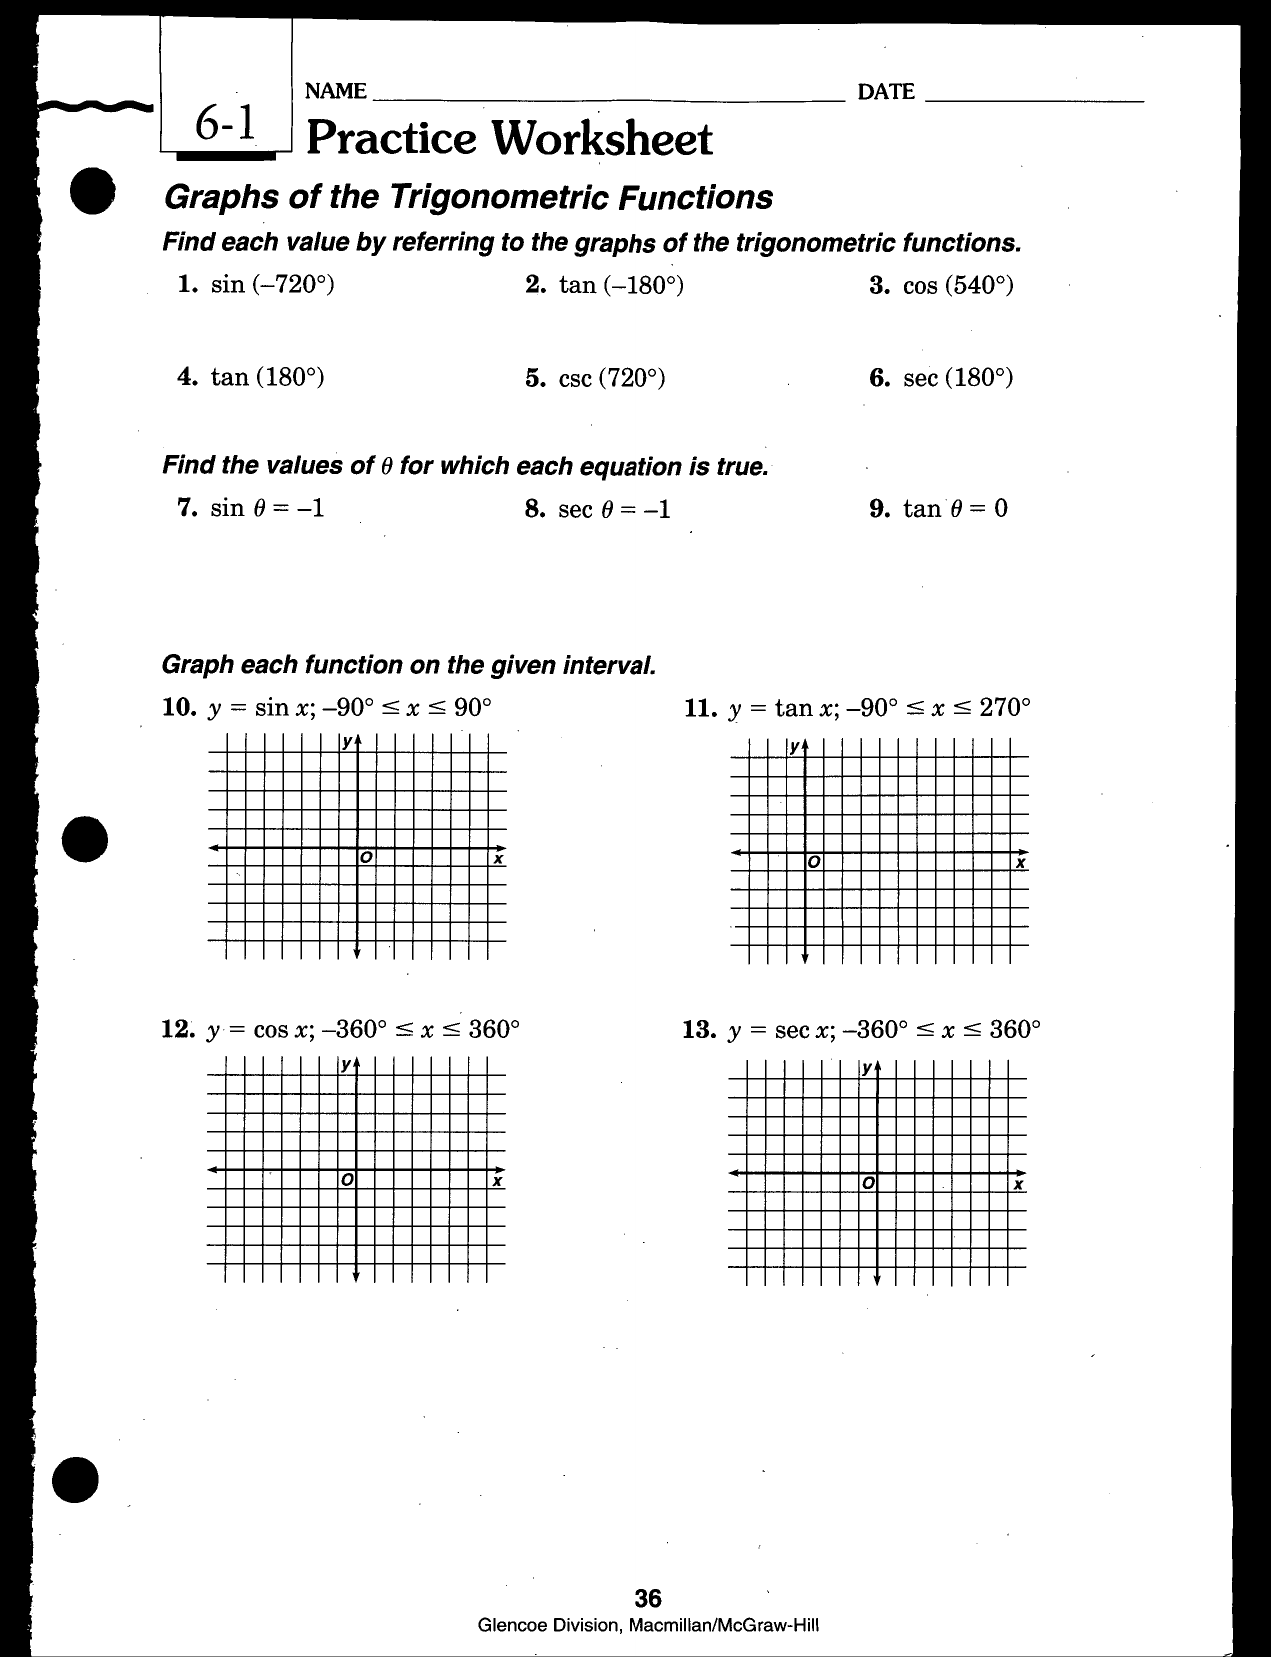 Practice Worksheets Graphing Trig Functions with Answers With Graphing Trig Functions Practice Worksheet